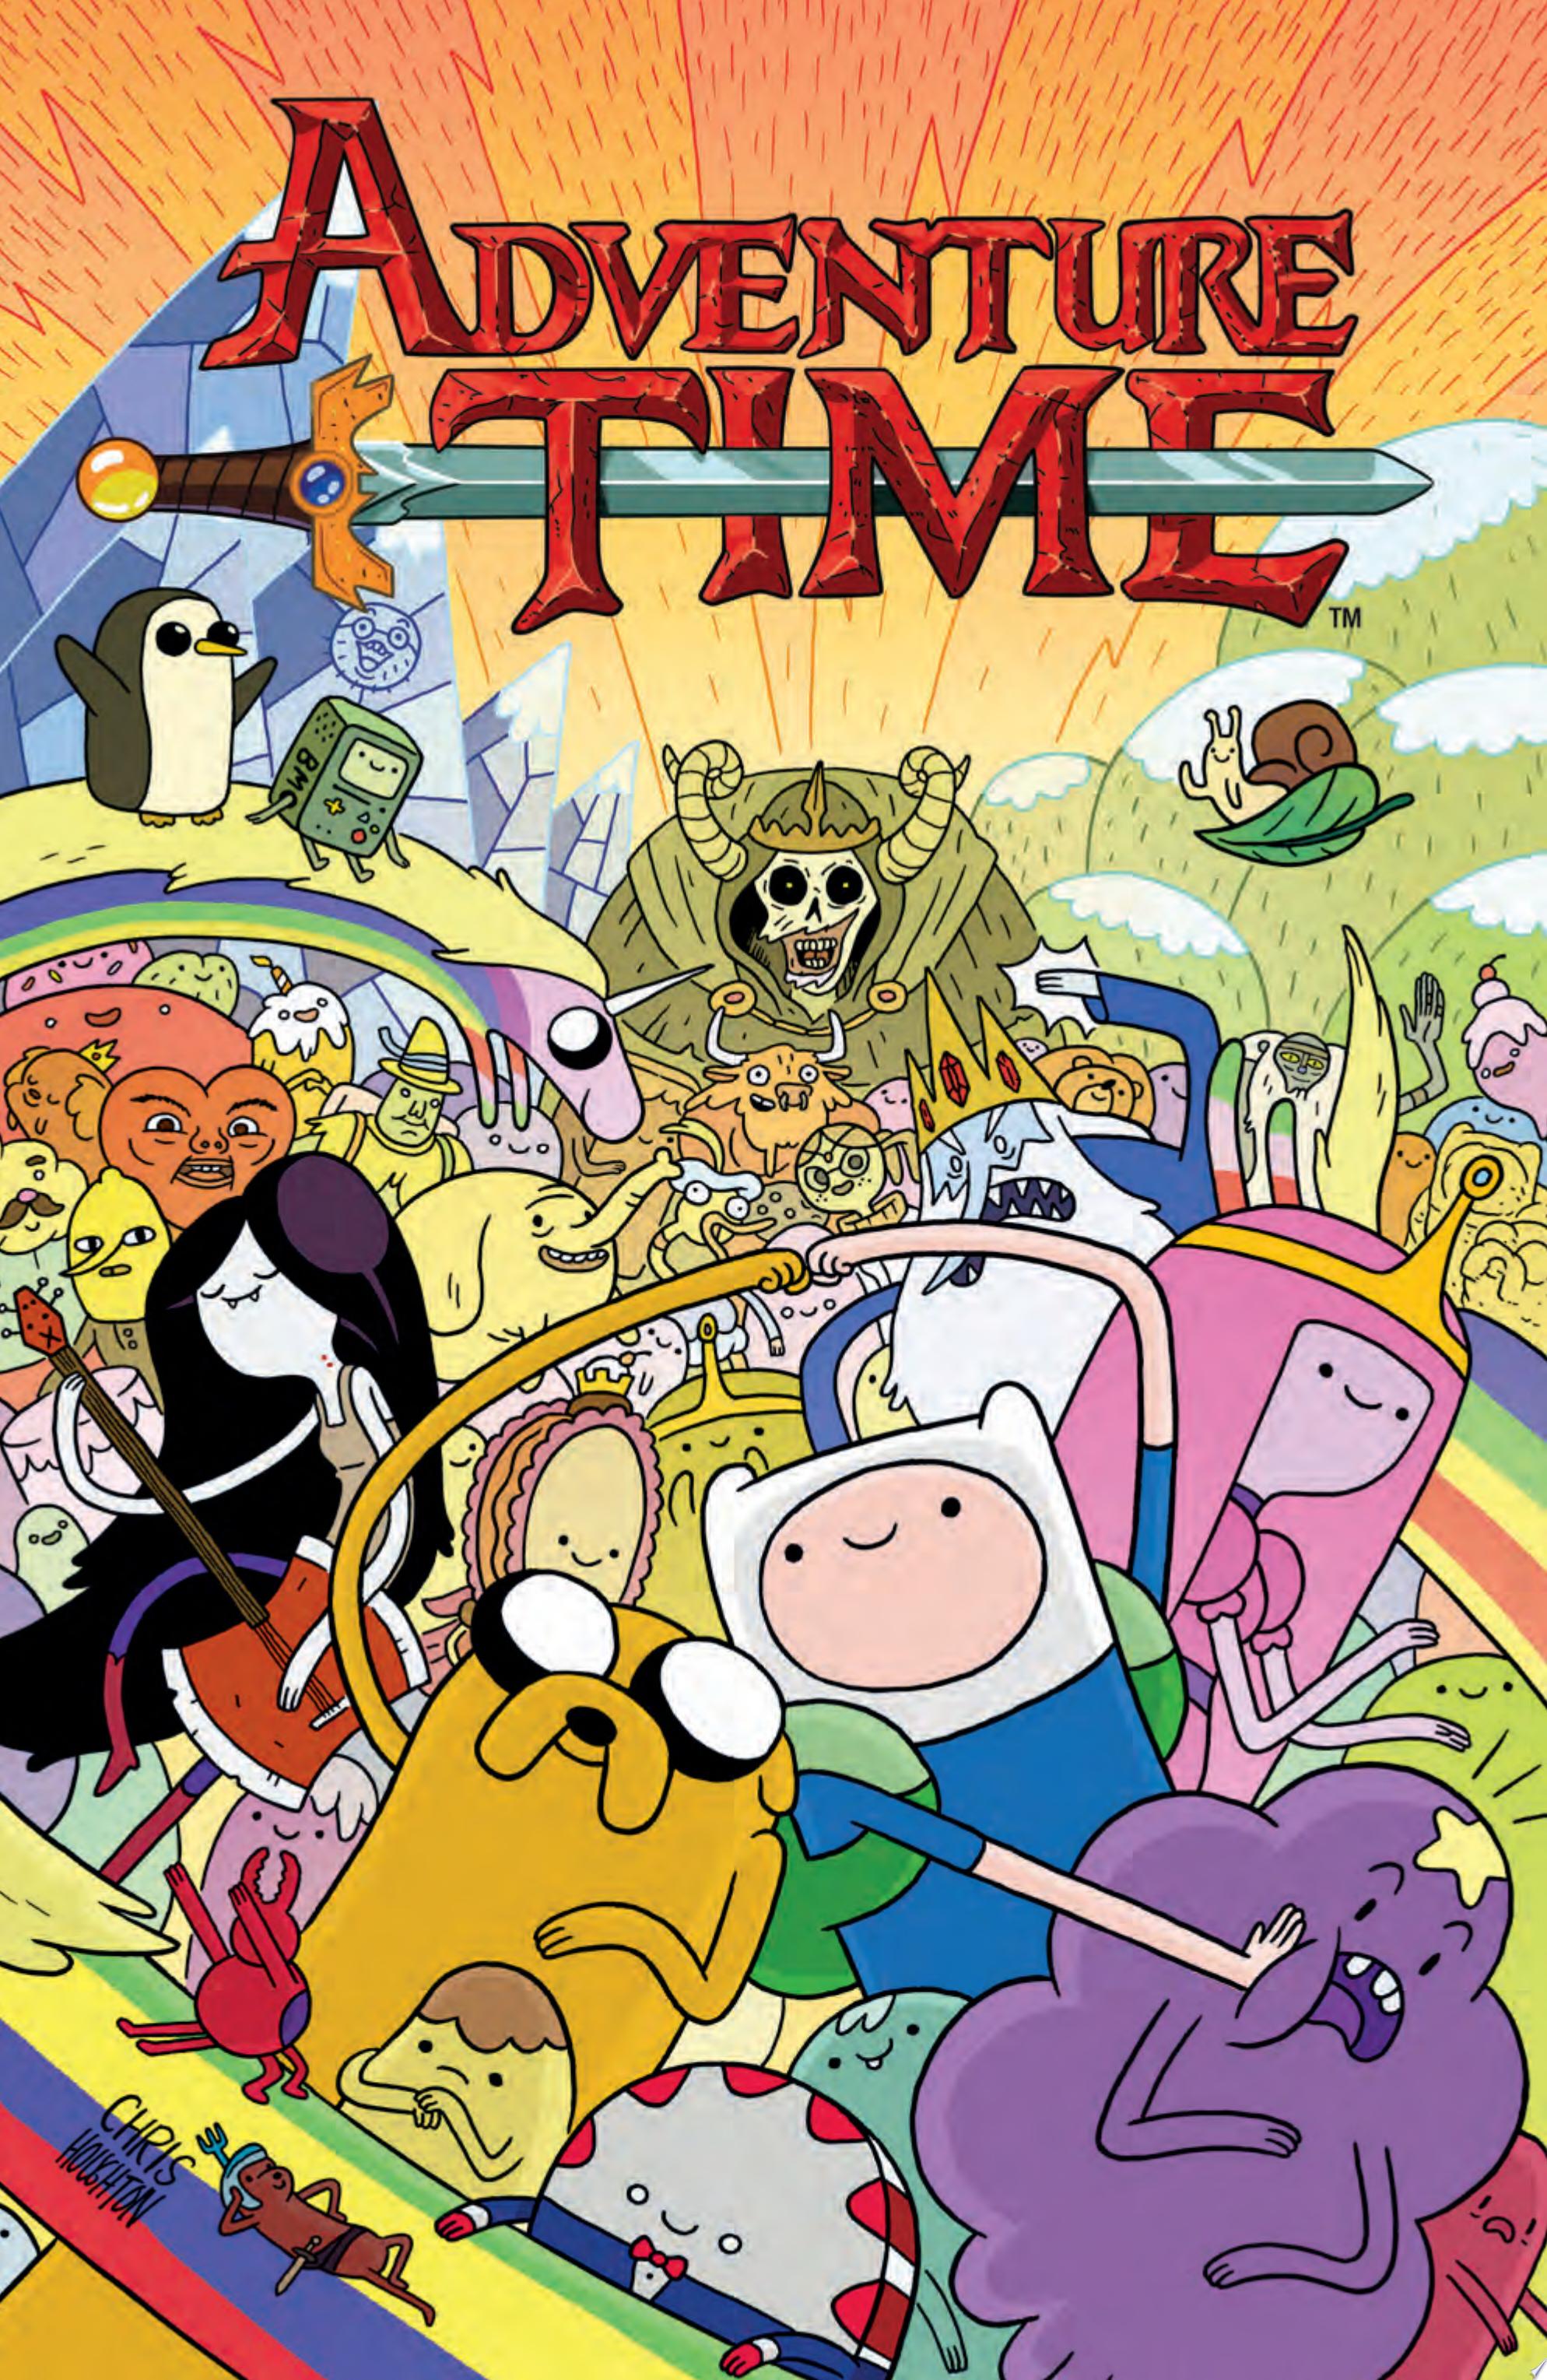 Image for "Adventure Time"